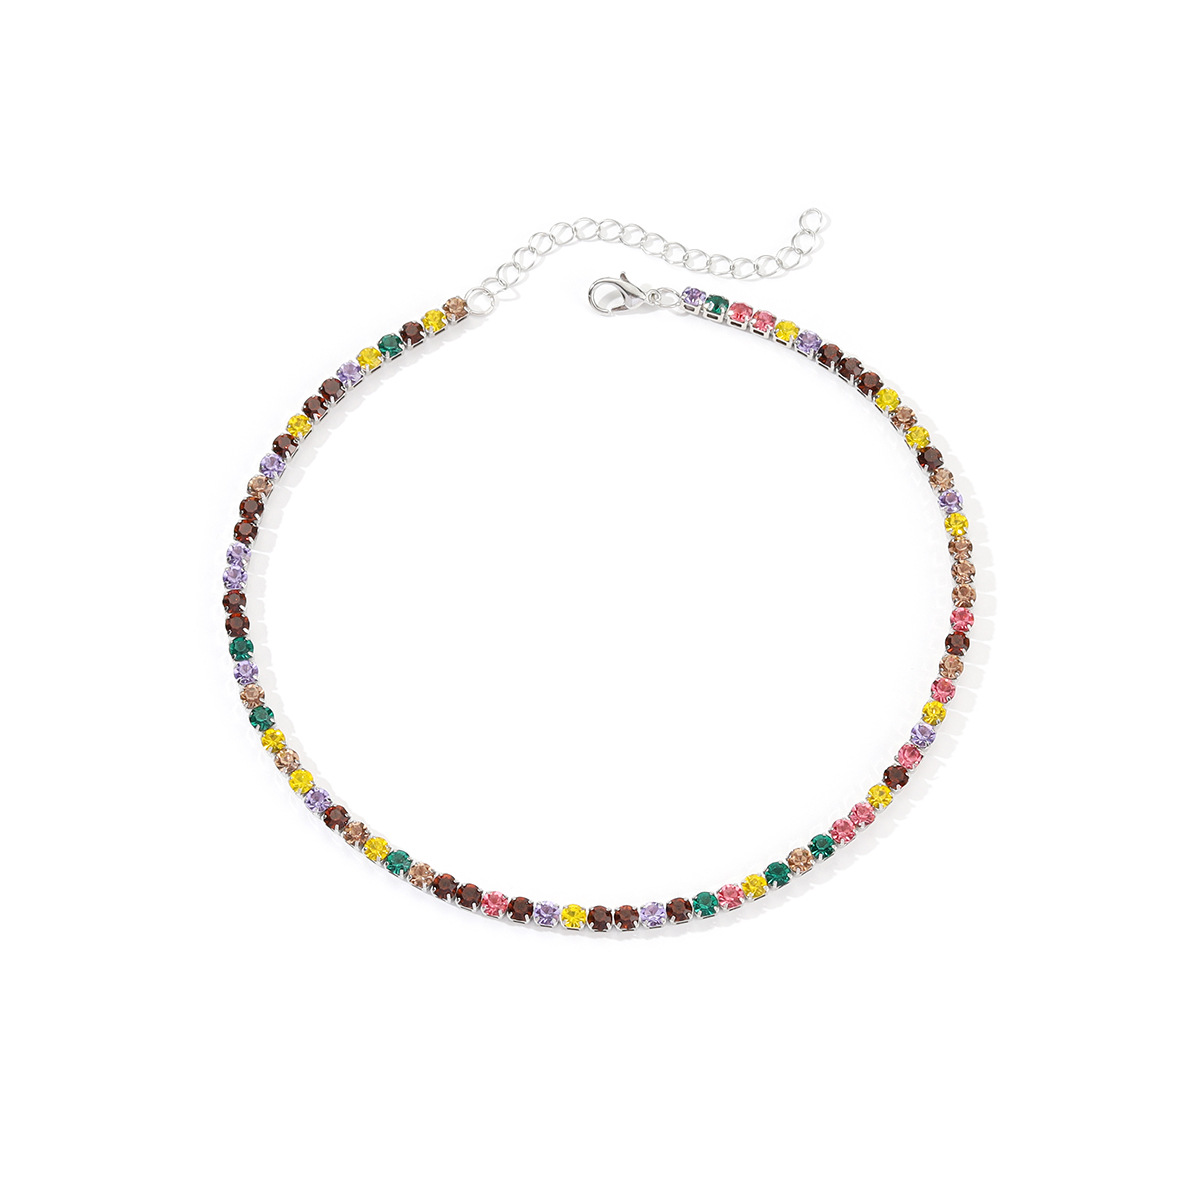 Colorful silver necklace